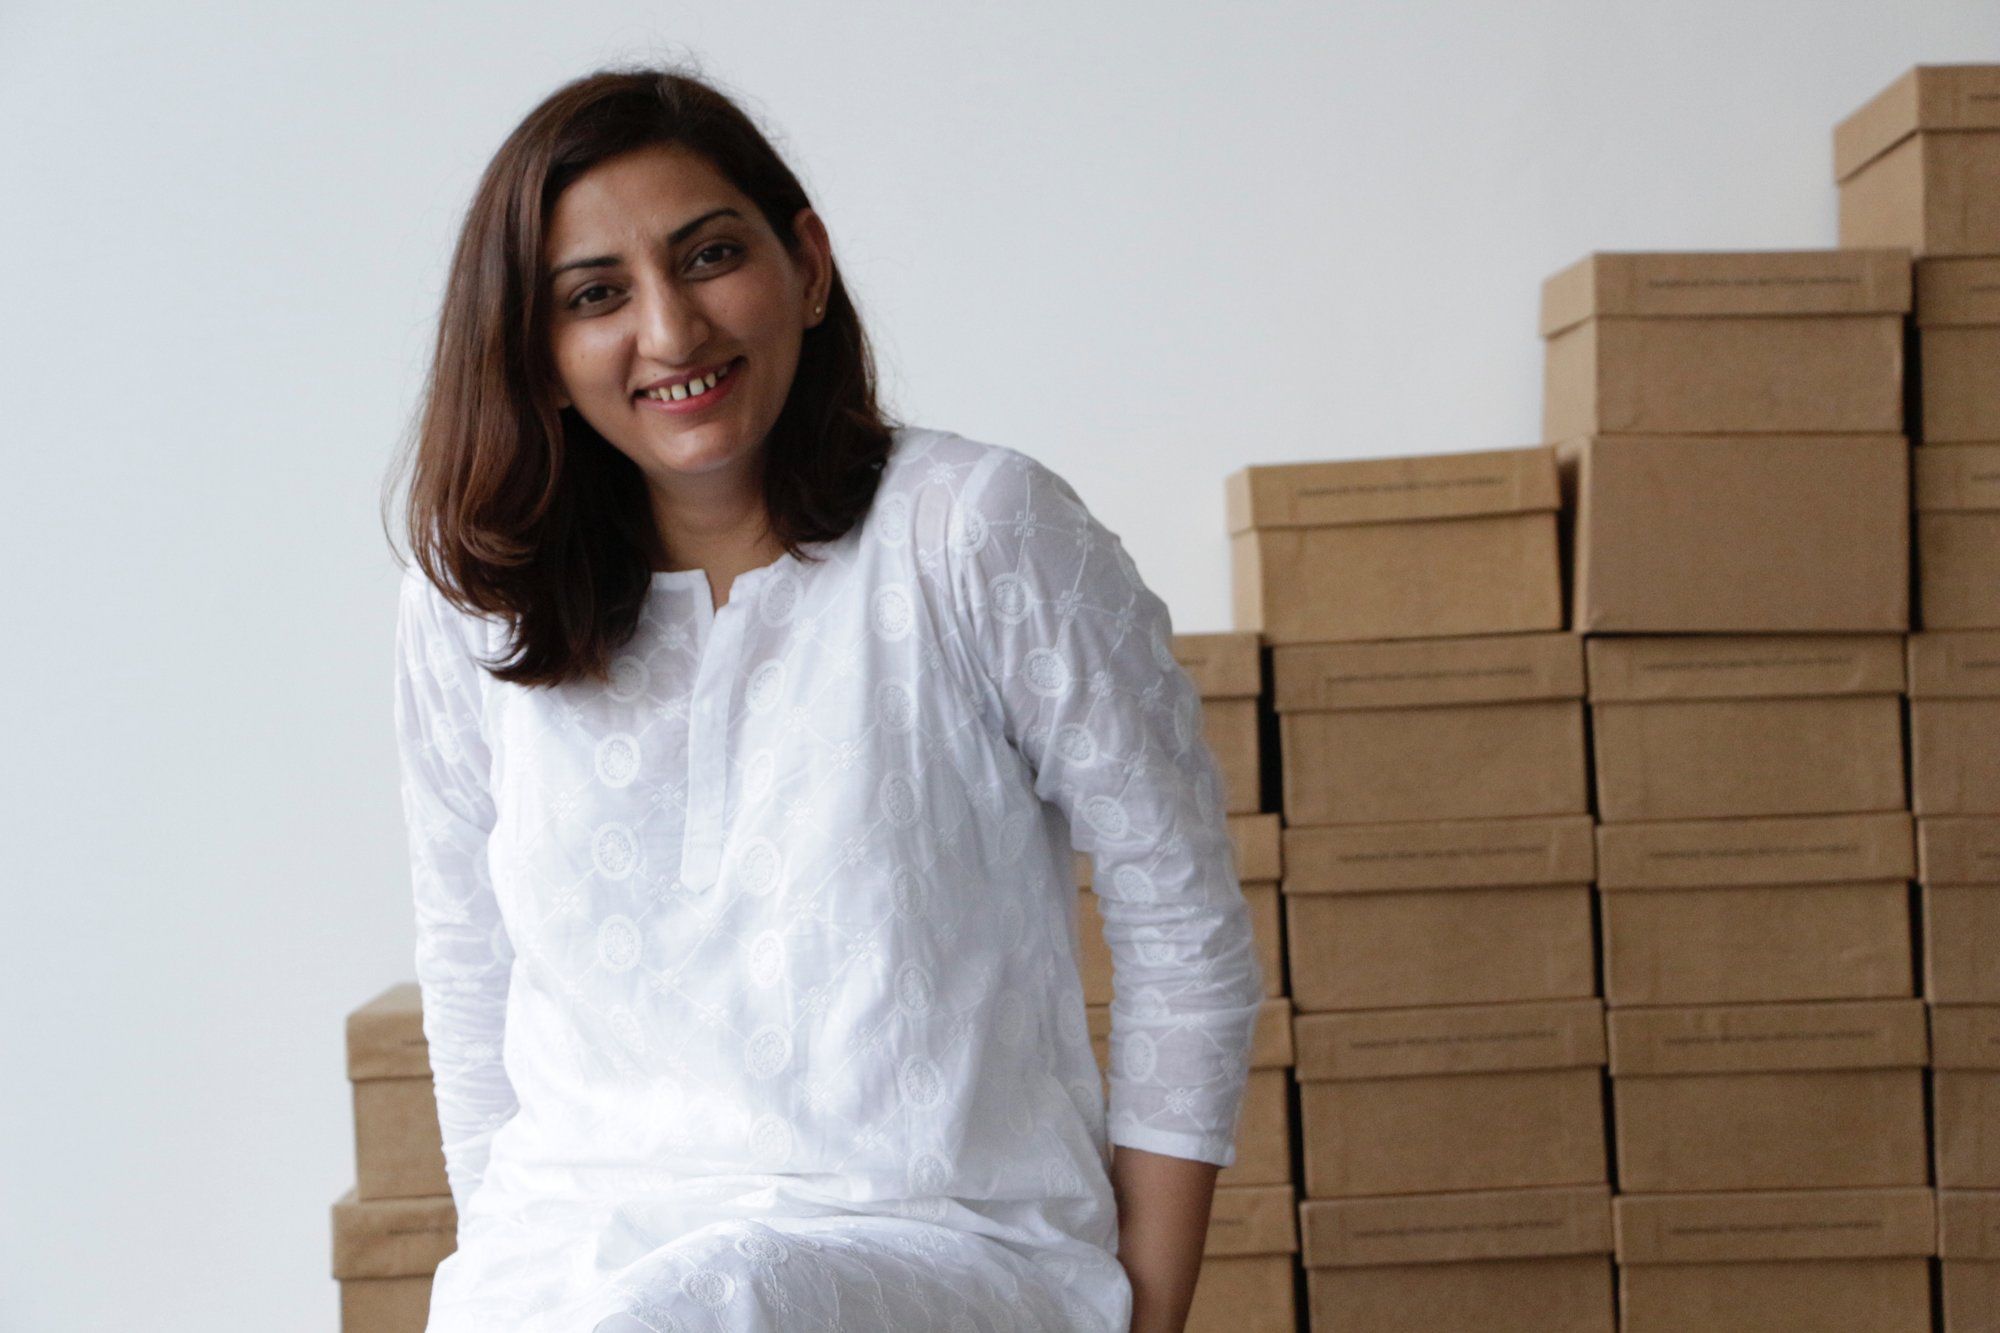 Atoms Co-Founder Sidra Qasim on Her Humans of New York Experience